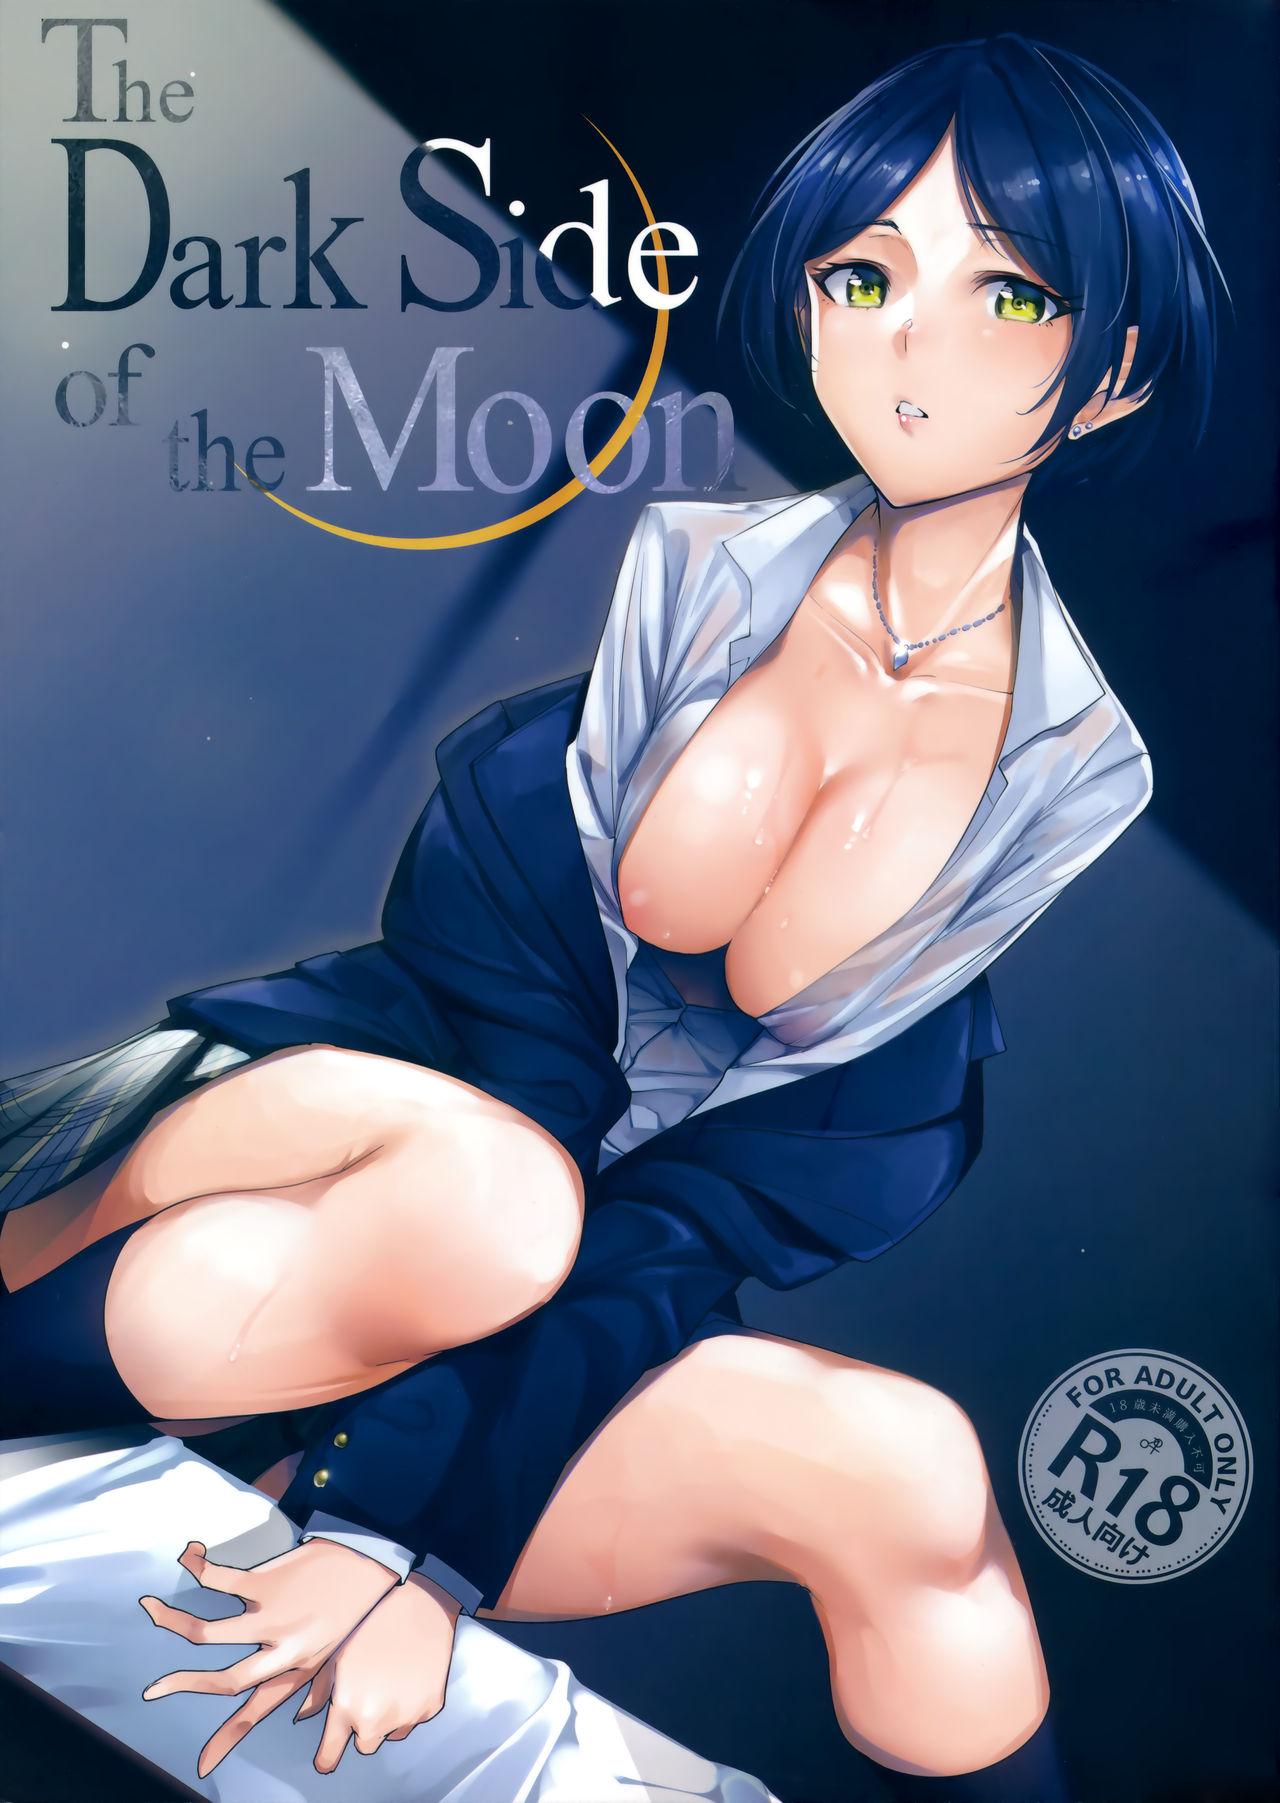 Gaystraight The Dark Side of the Moon - The idolmaster Ass Licking - Picture 1